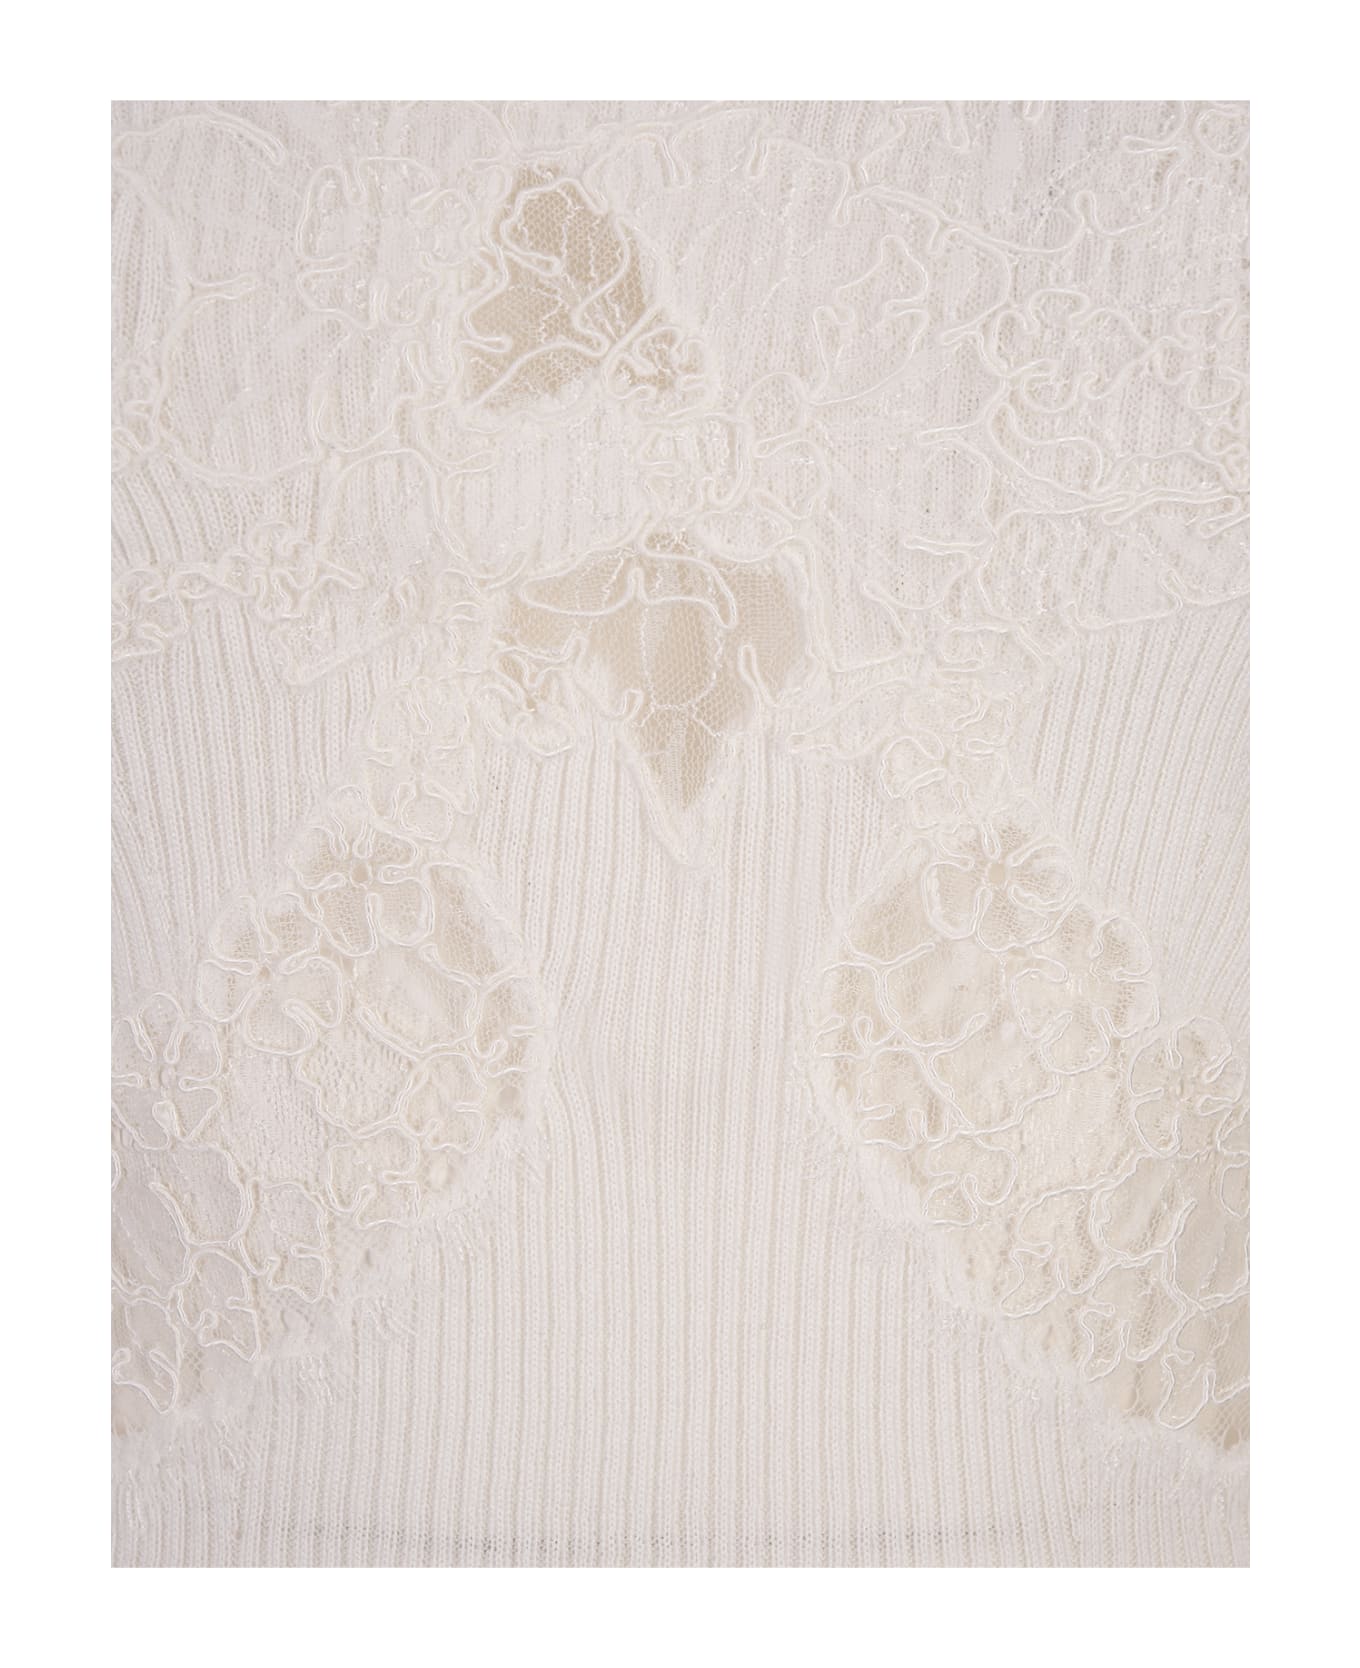 Ermanno Scervino White Sweater With Lace And Boat Neckline - White ニットウェア